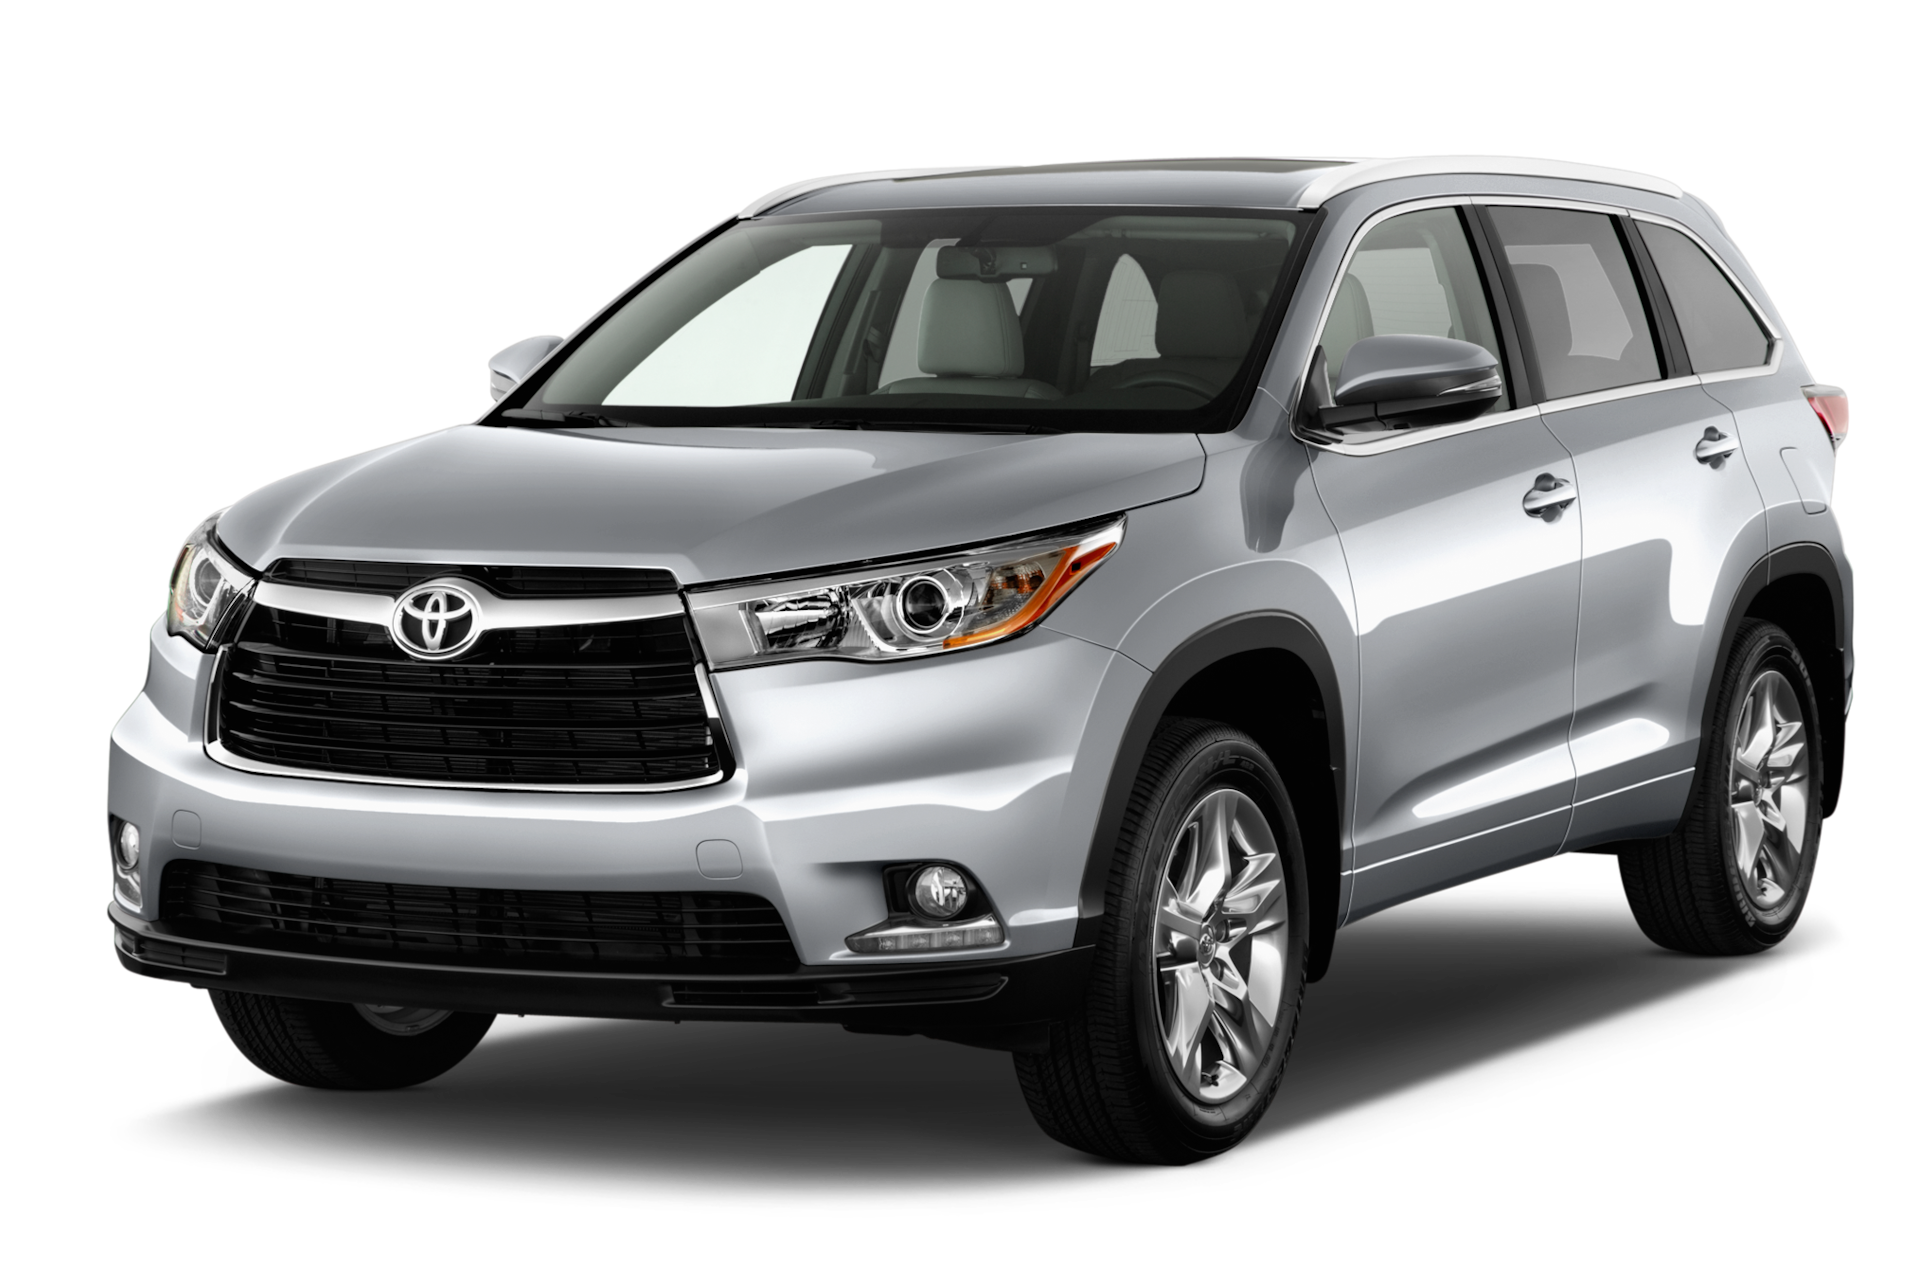 2016 Toyota Highlander Prices, Reviews, and Photos - MotorTrend